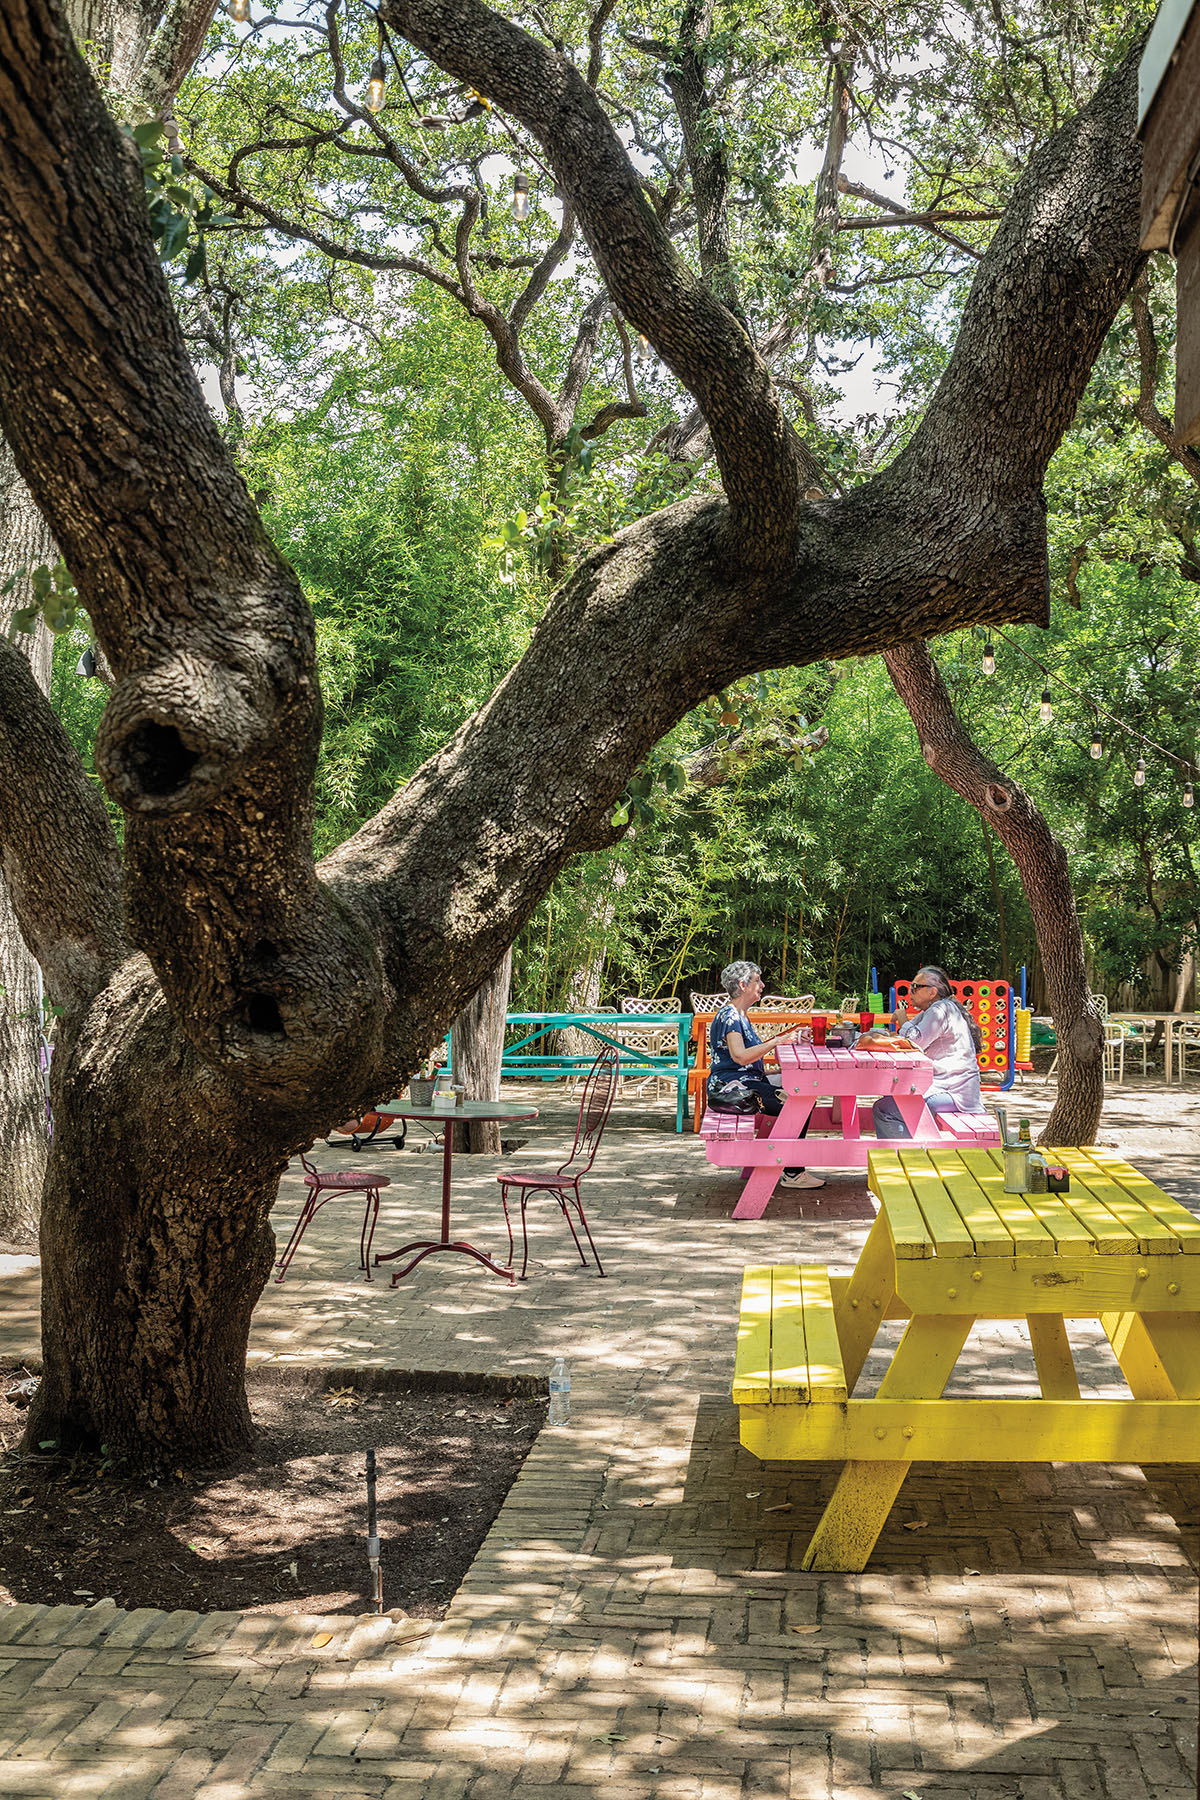 Brightly colored picnic tables underneath live oak trees